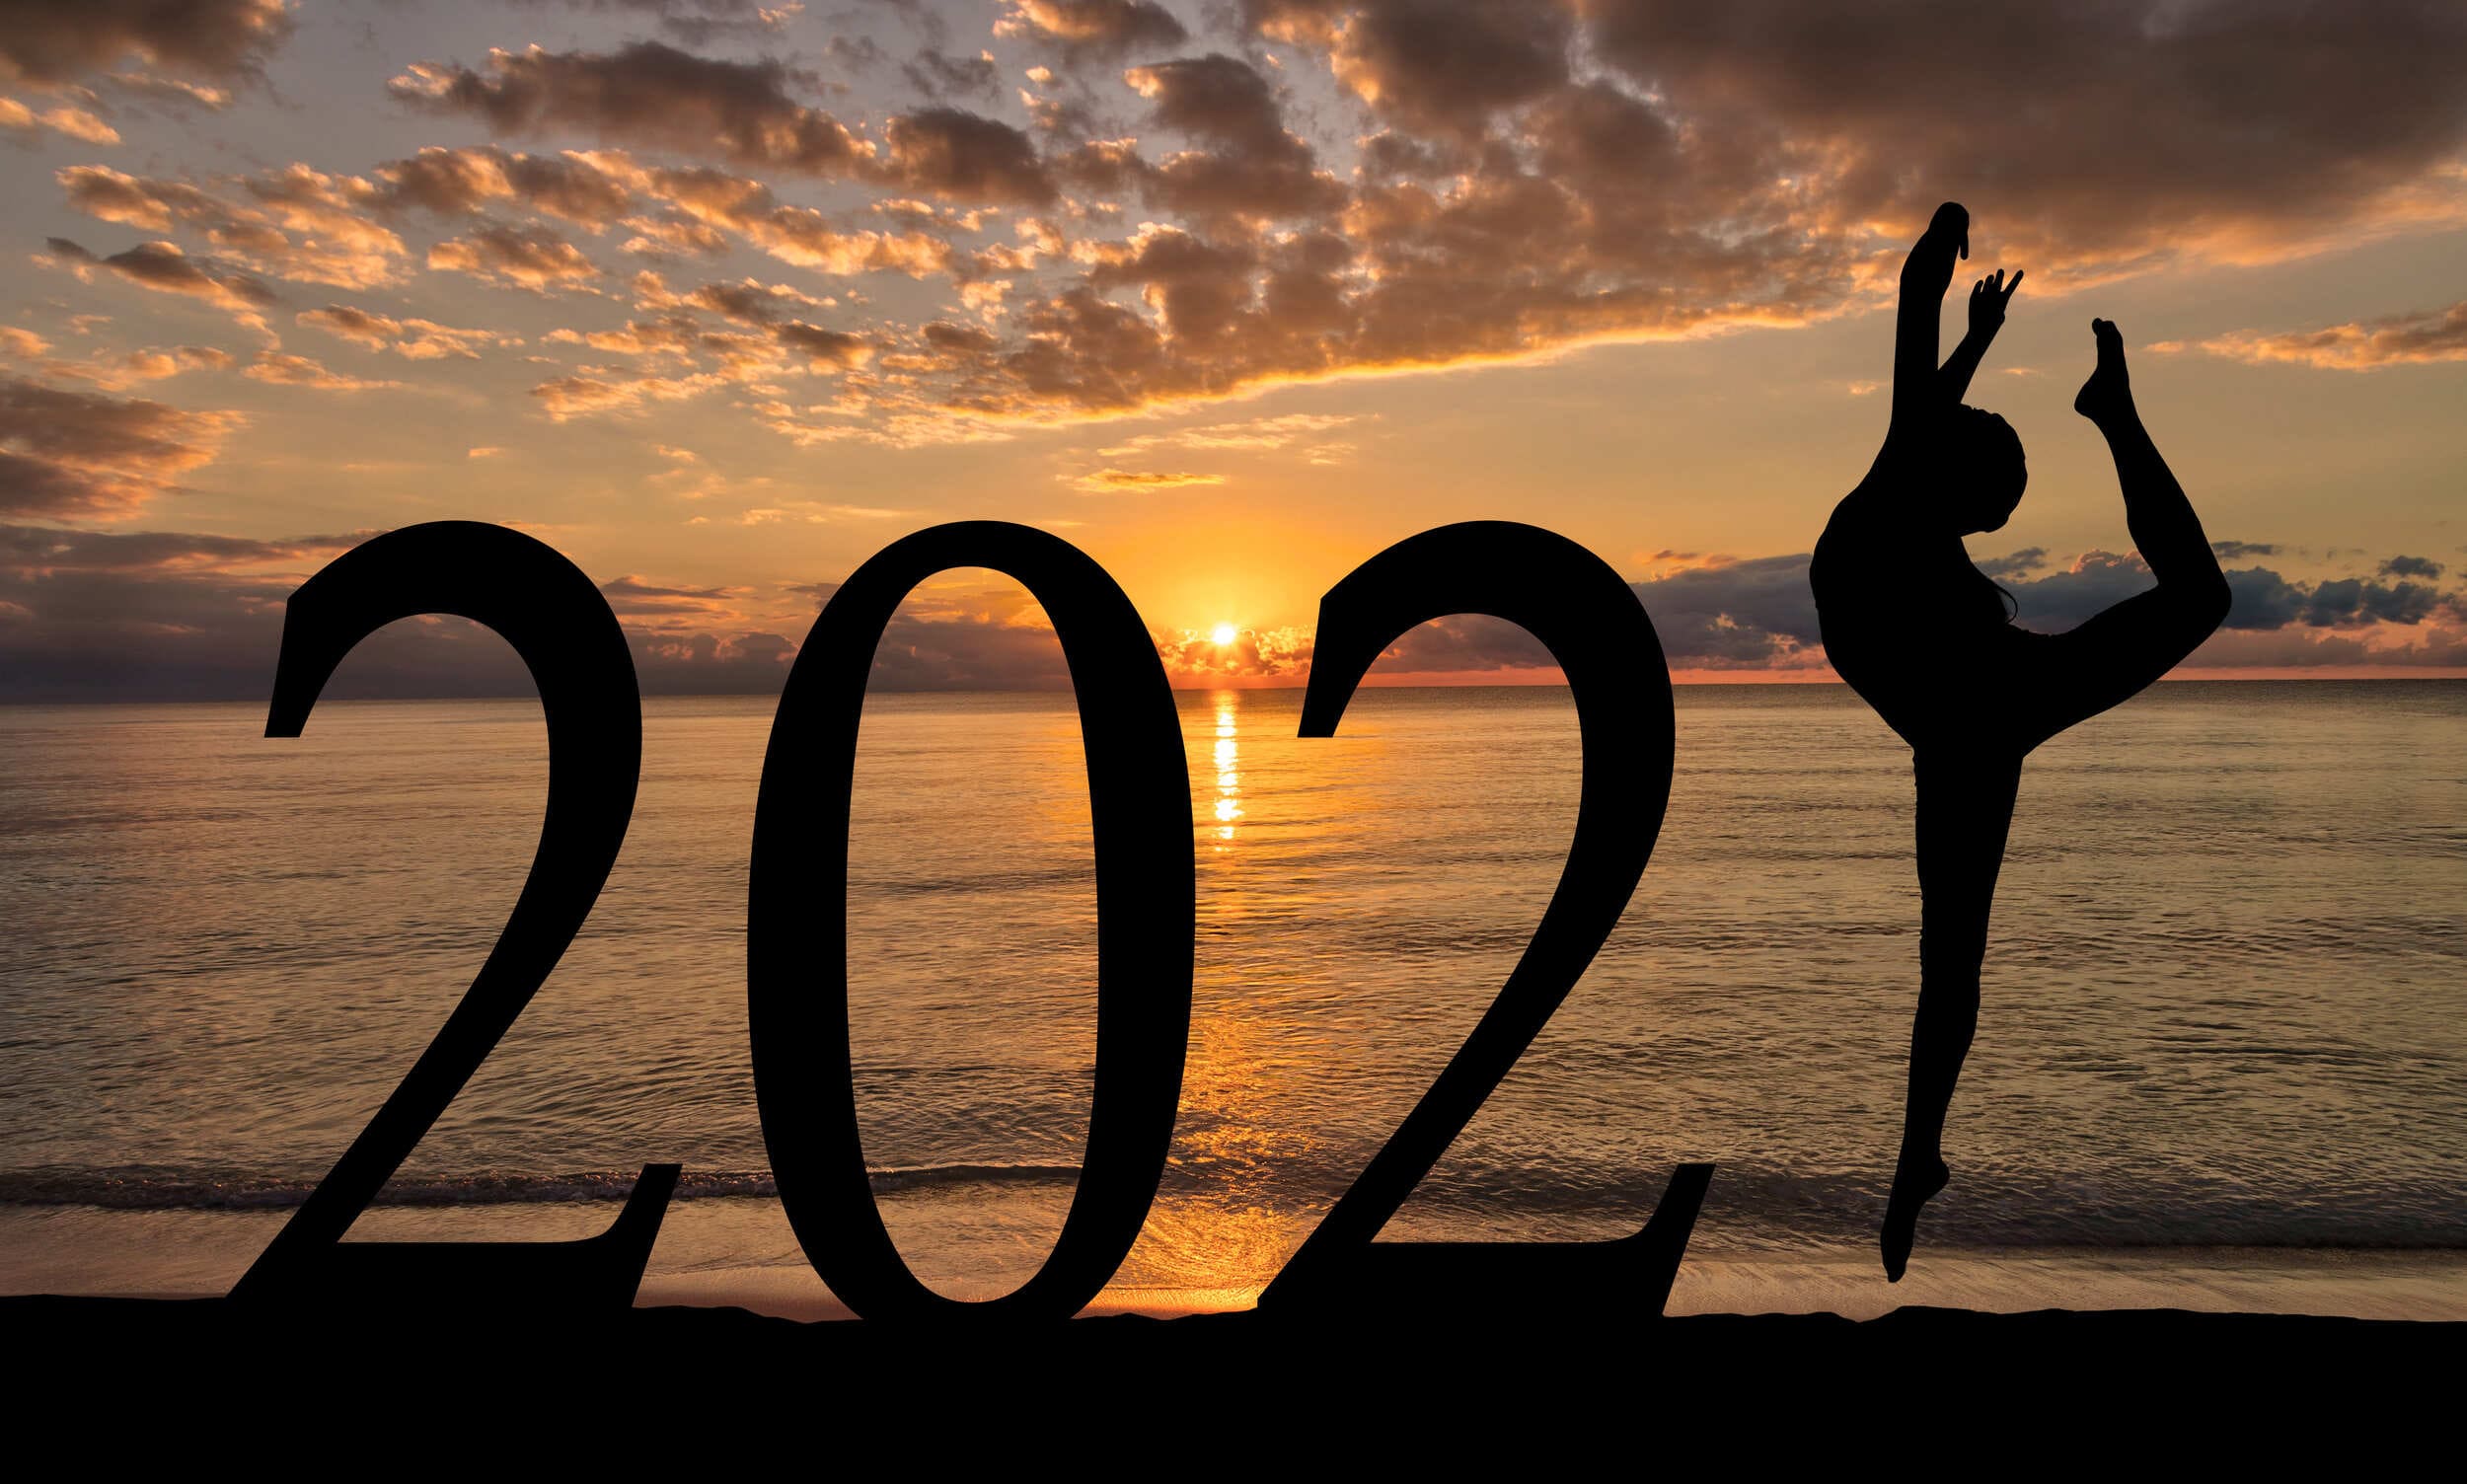 Silhouette of a person performing a yoga pose forming part of the number '2021' against a beautiful sunset on the beach.